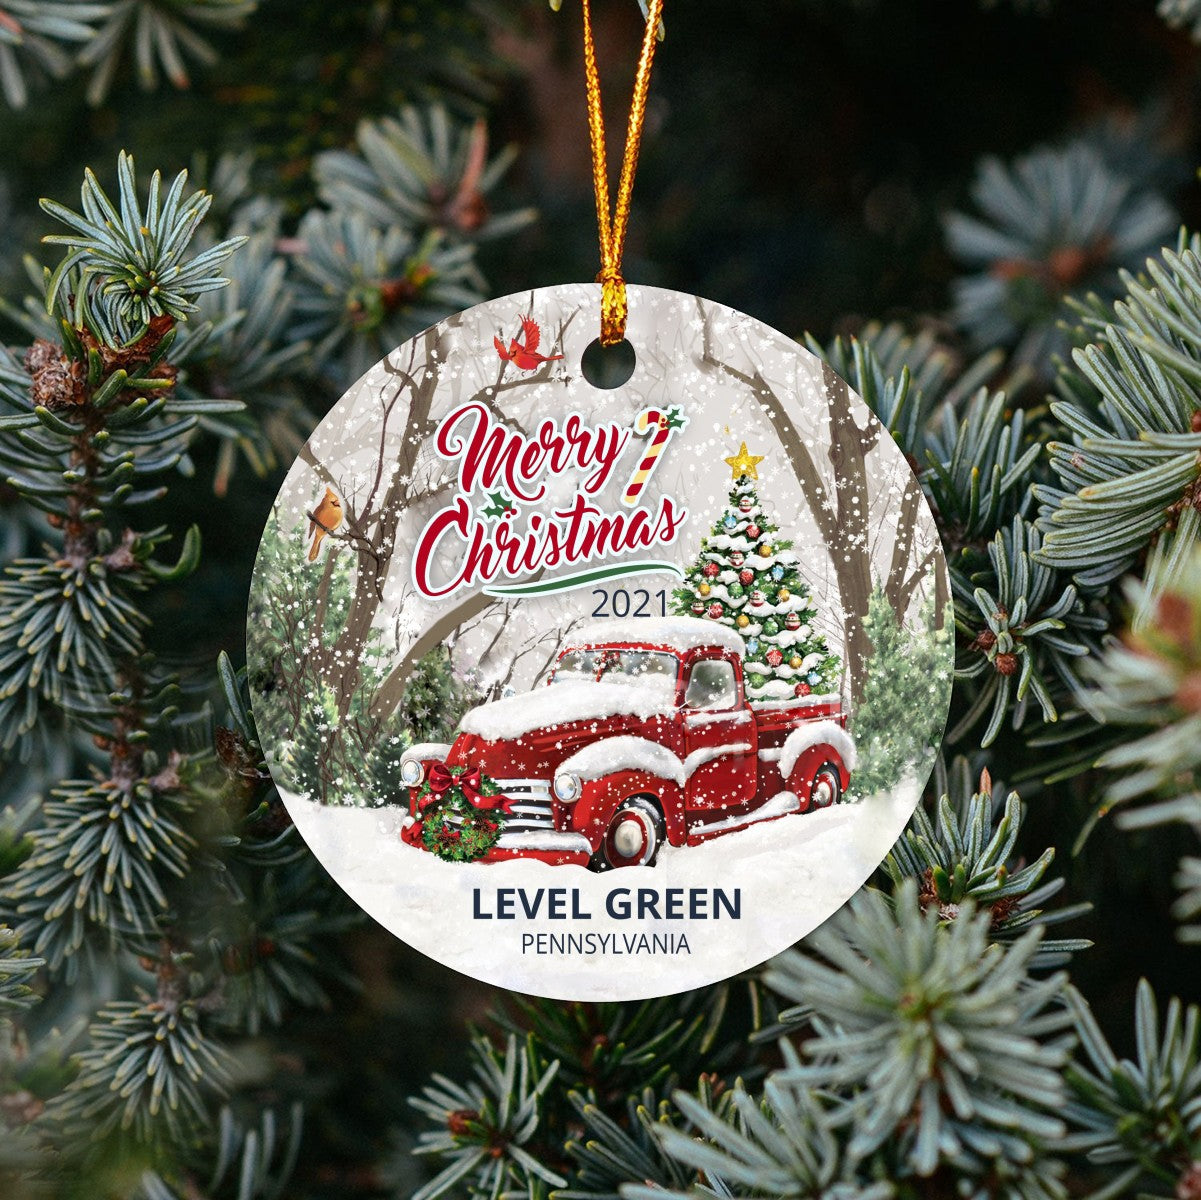 Christmas Tree Ornaments Level Green - Ornament With Name City, State Level Green Pennsylvania PA Ornament - Red Truck Xmas Ornaments 3'' Plastic Gift For Family, Friend And Housewarming